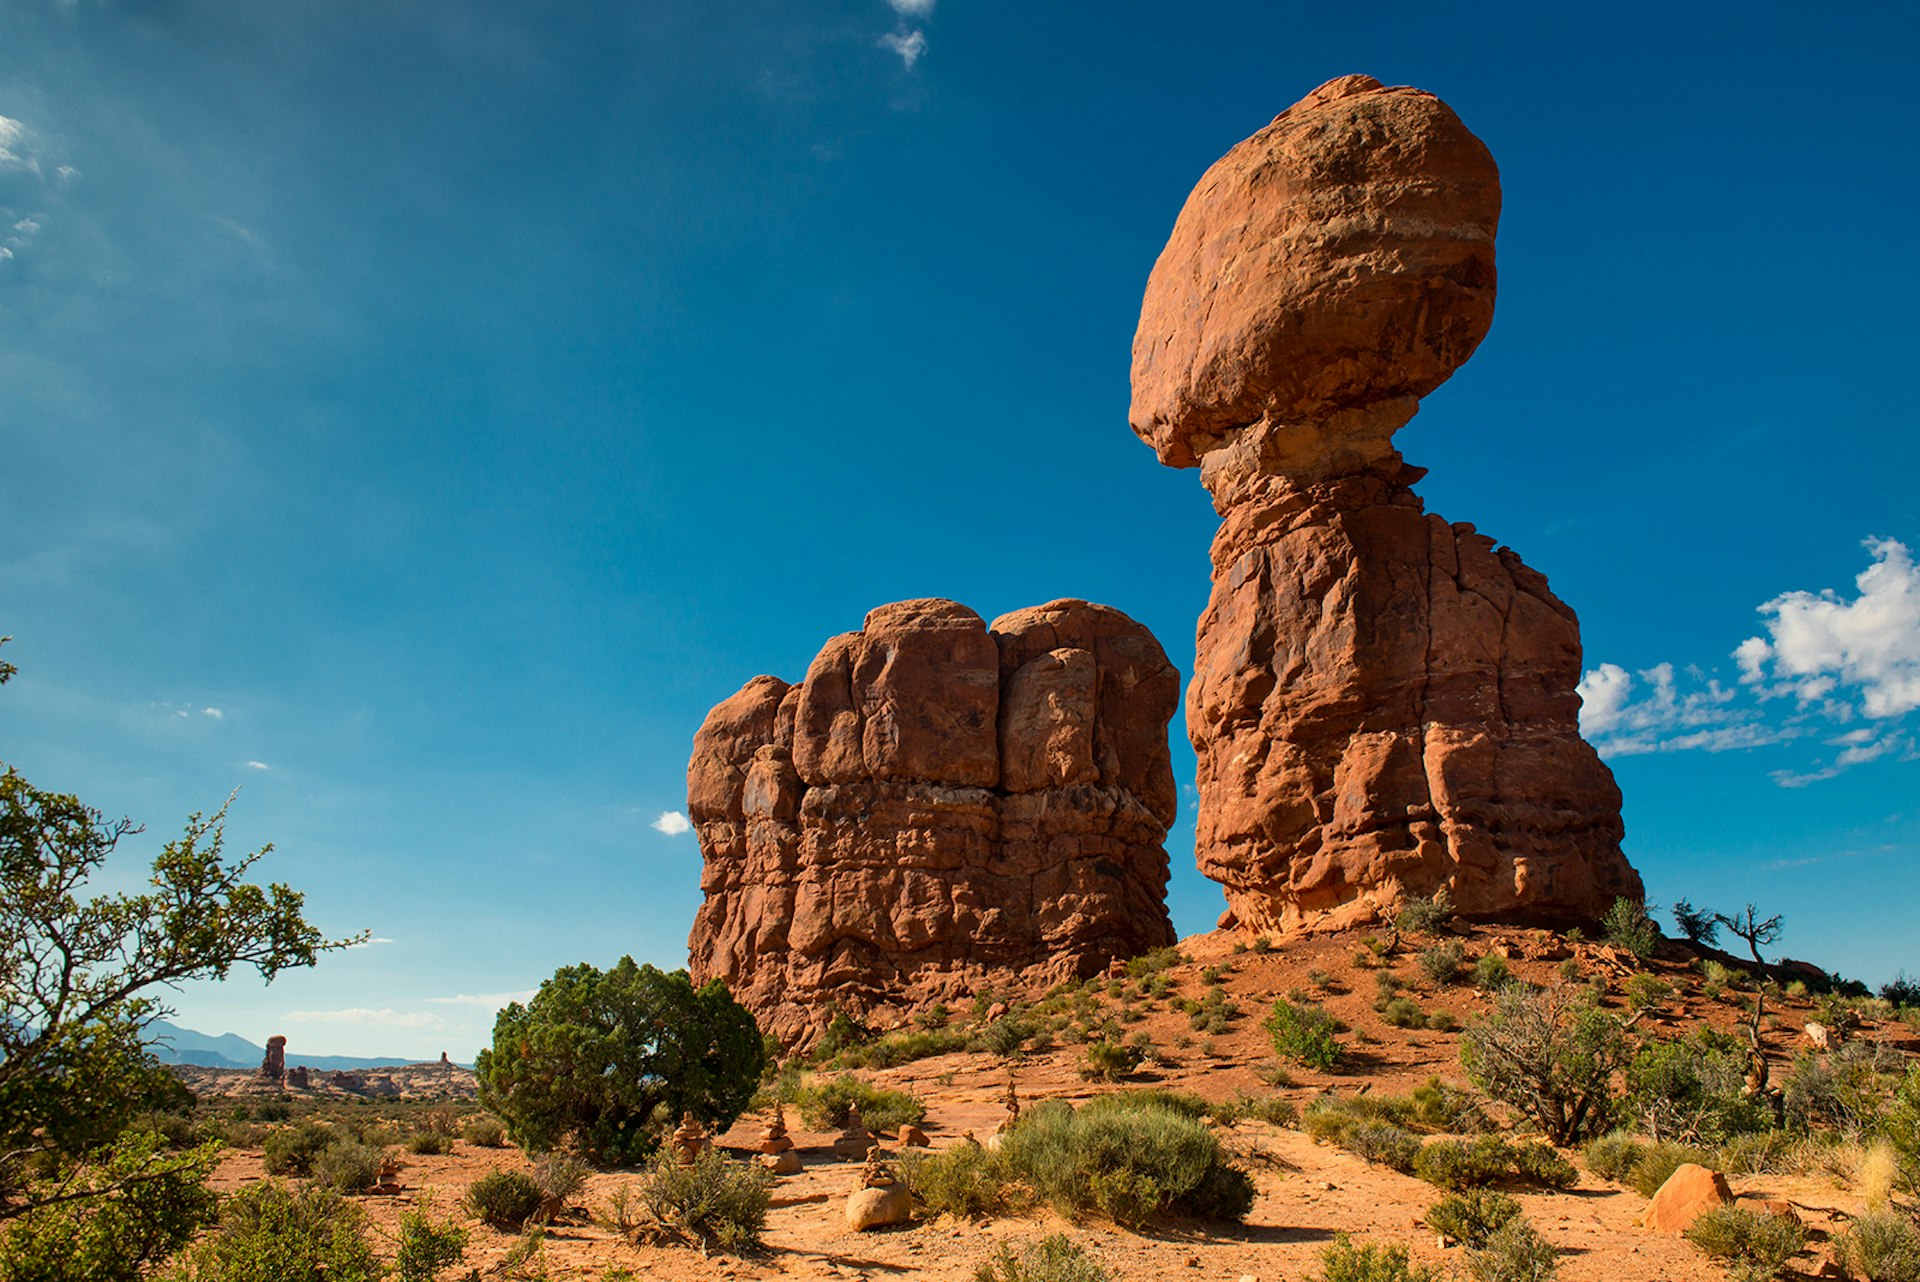 Balanced Rock in Arches National Park, USA © Nicolas Kipourax Paquet / Getty Images